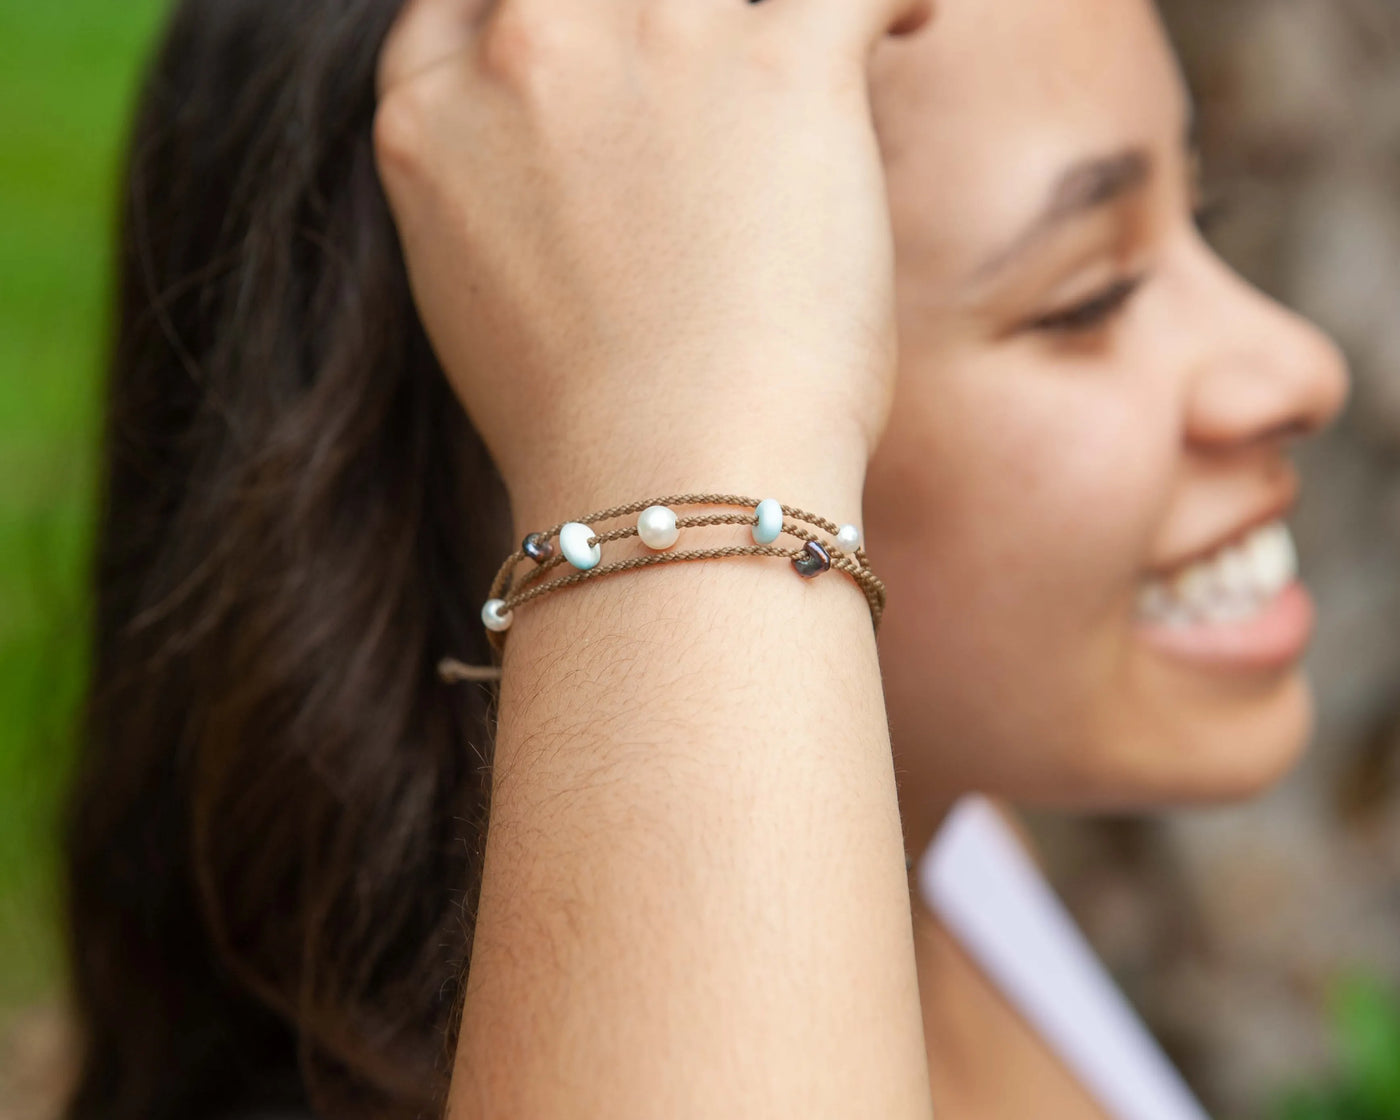 Seven Seas X PADI Riptide Bracelet with white pearl on model wrist with her smiling in the background